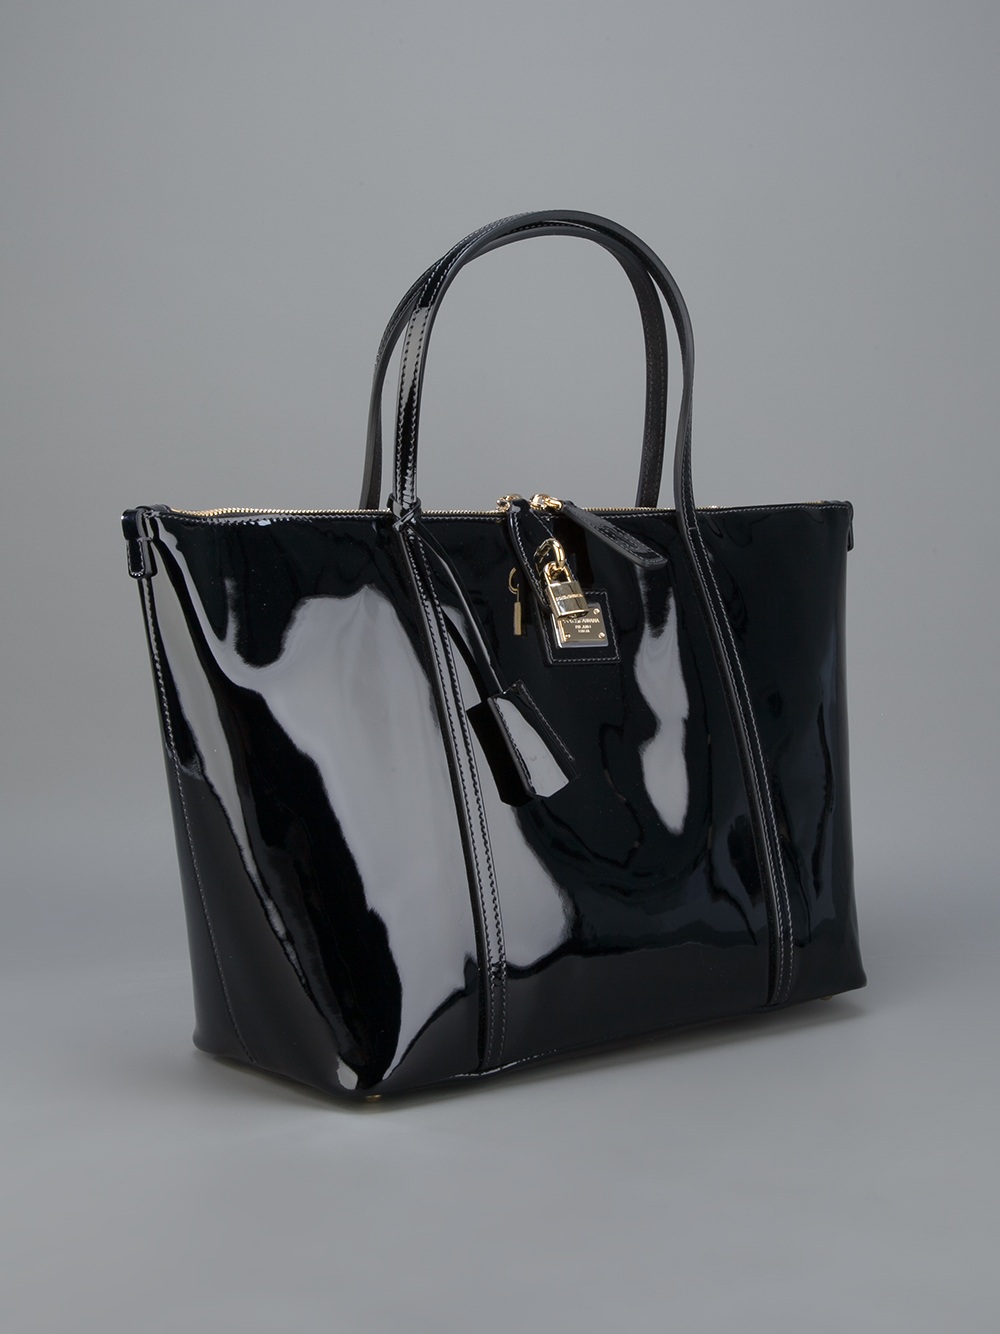 Dolce & Gabbana - Authenticated Travel Bag - Patent Leather Black Plain for Women, Never Worn